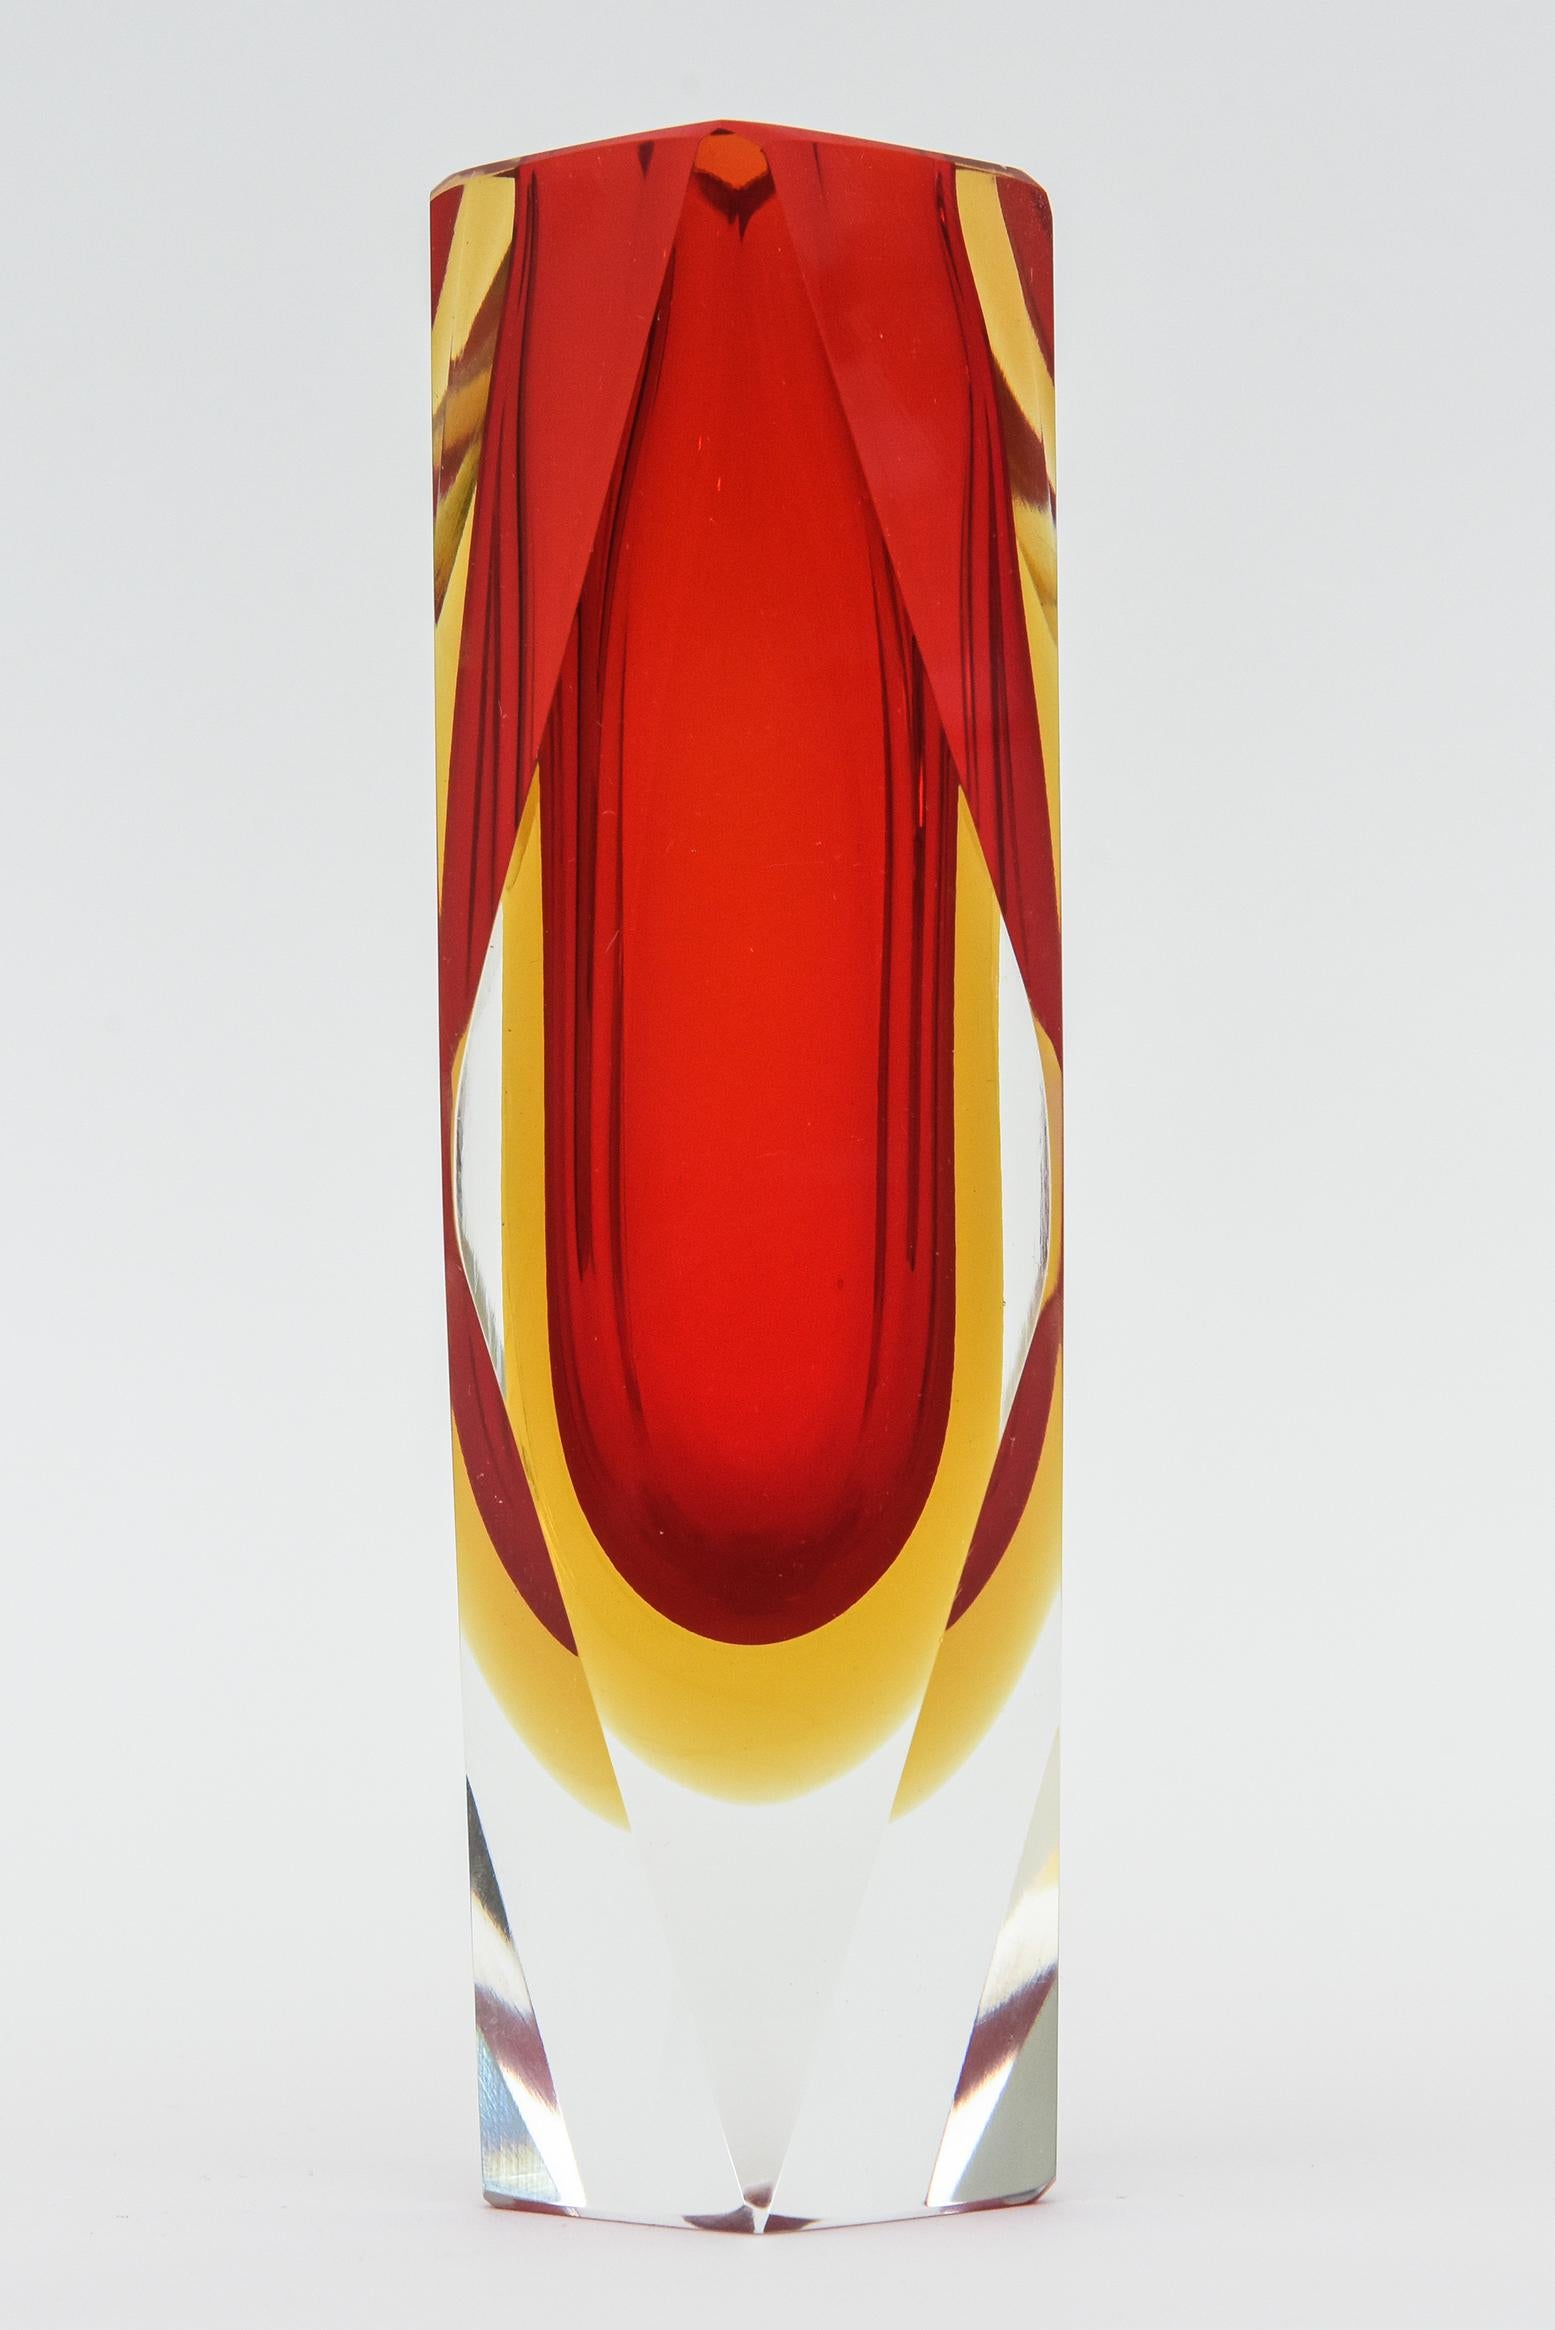 Mandruzzato Vintage Murano Red and Yellow Sommerso Faceted Glass Vase Italian For Sale 5